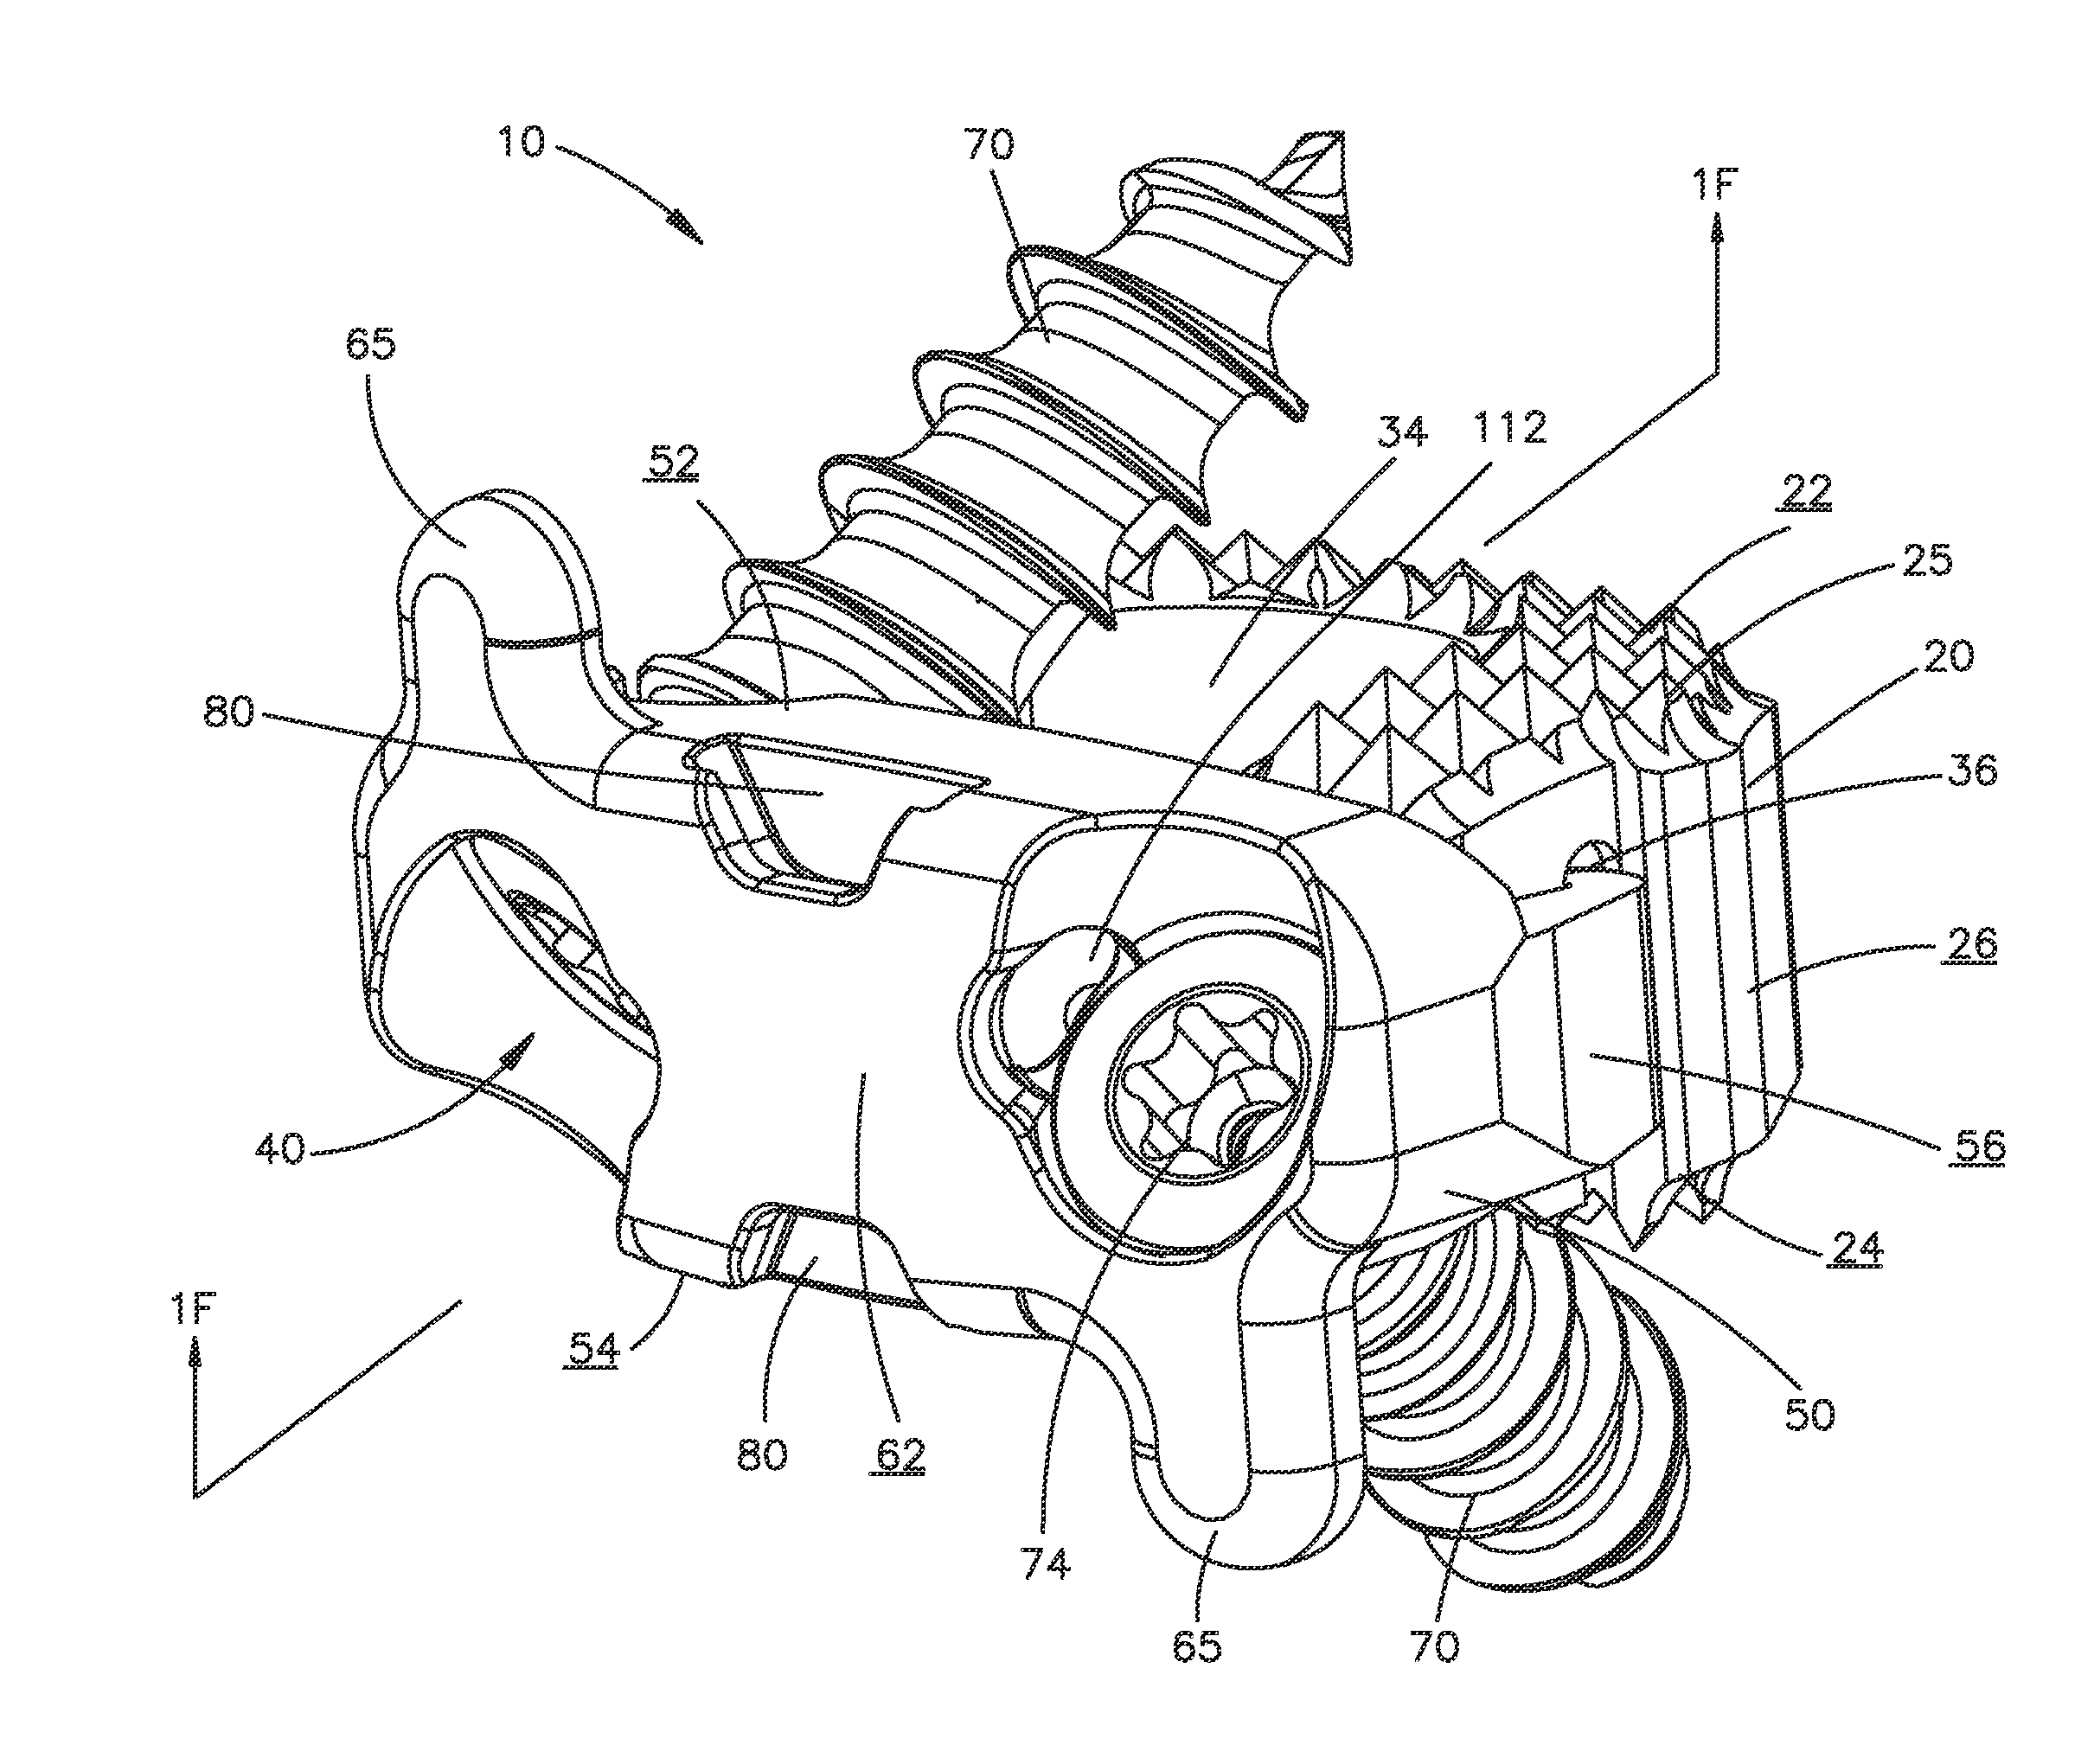 Zero-profile interbody spacer and coupled plate assembly